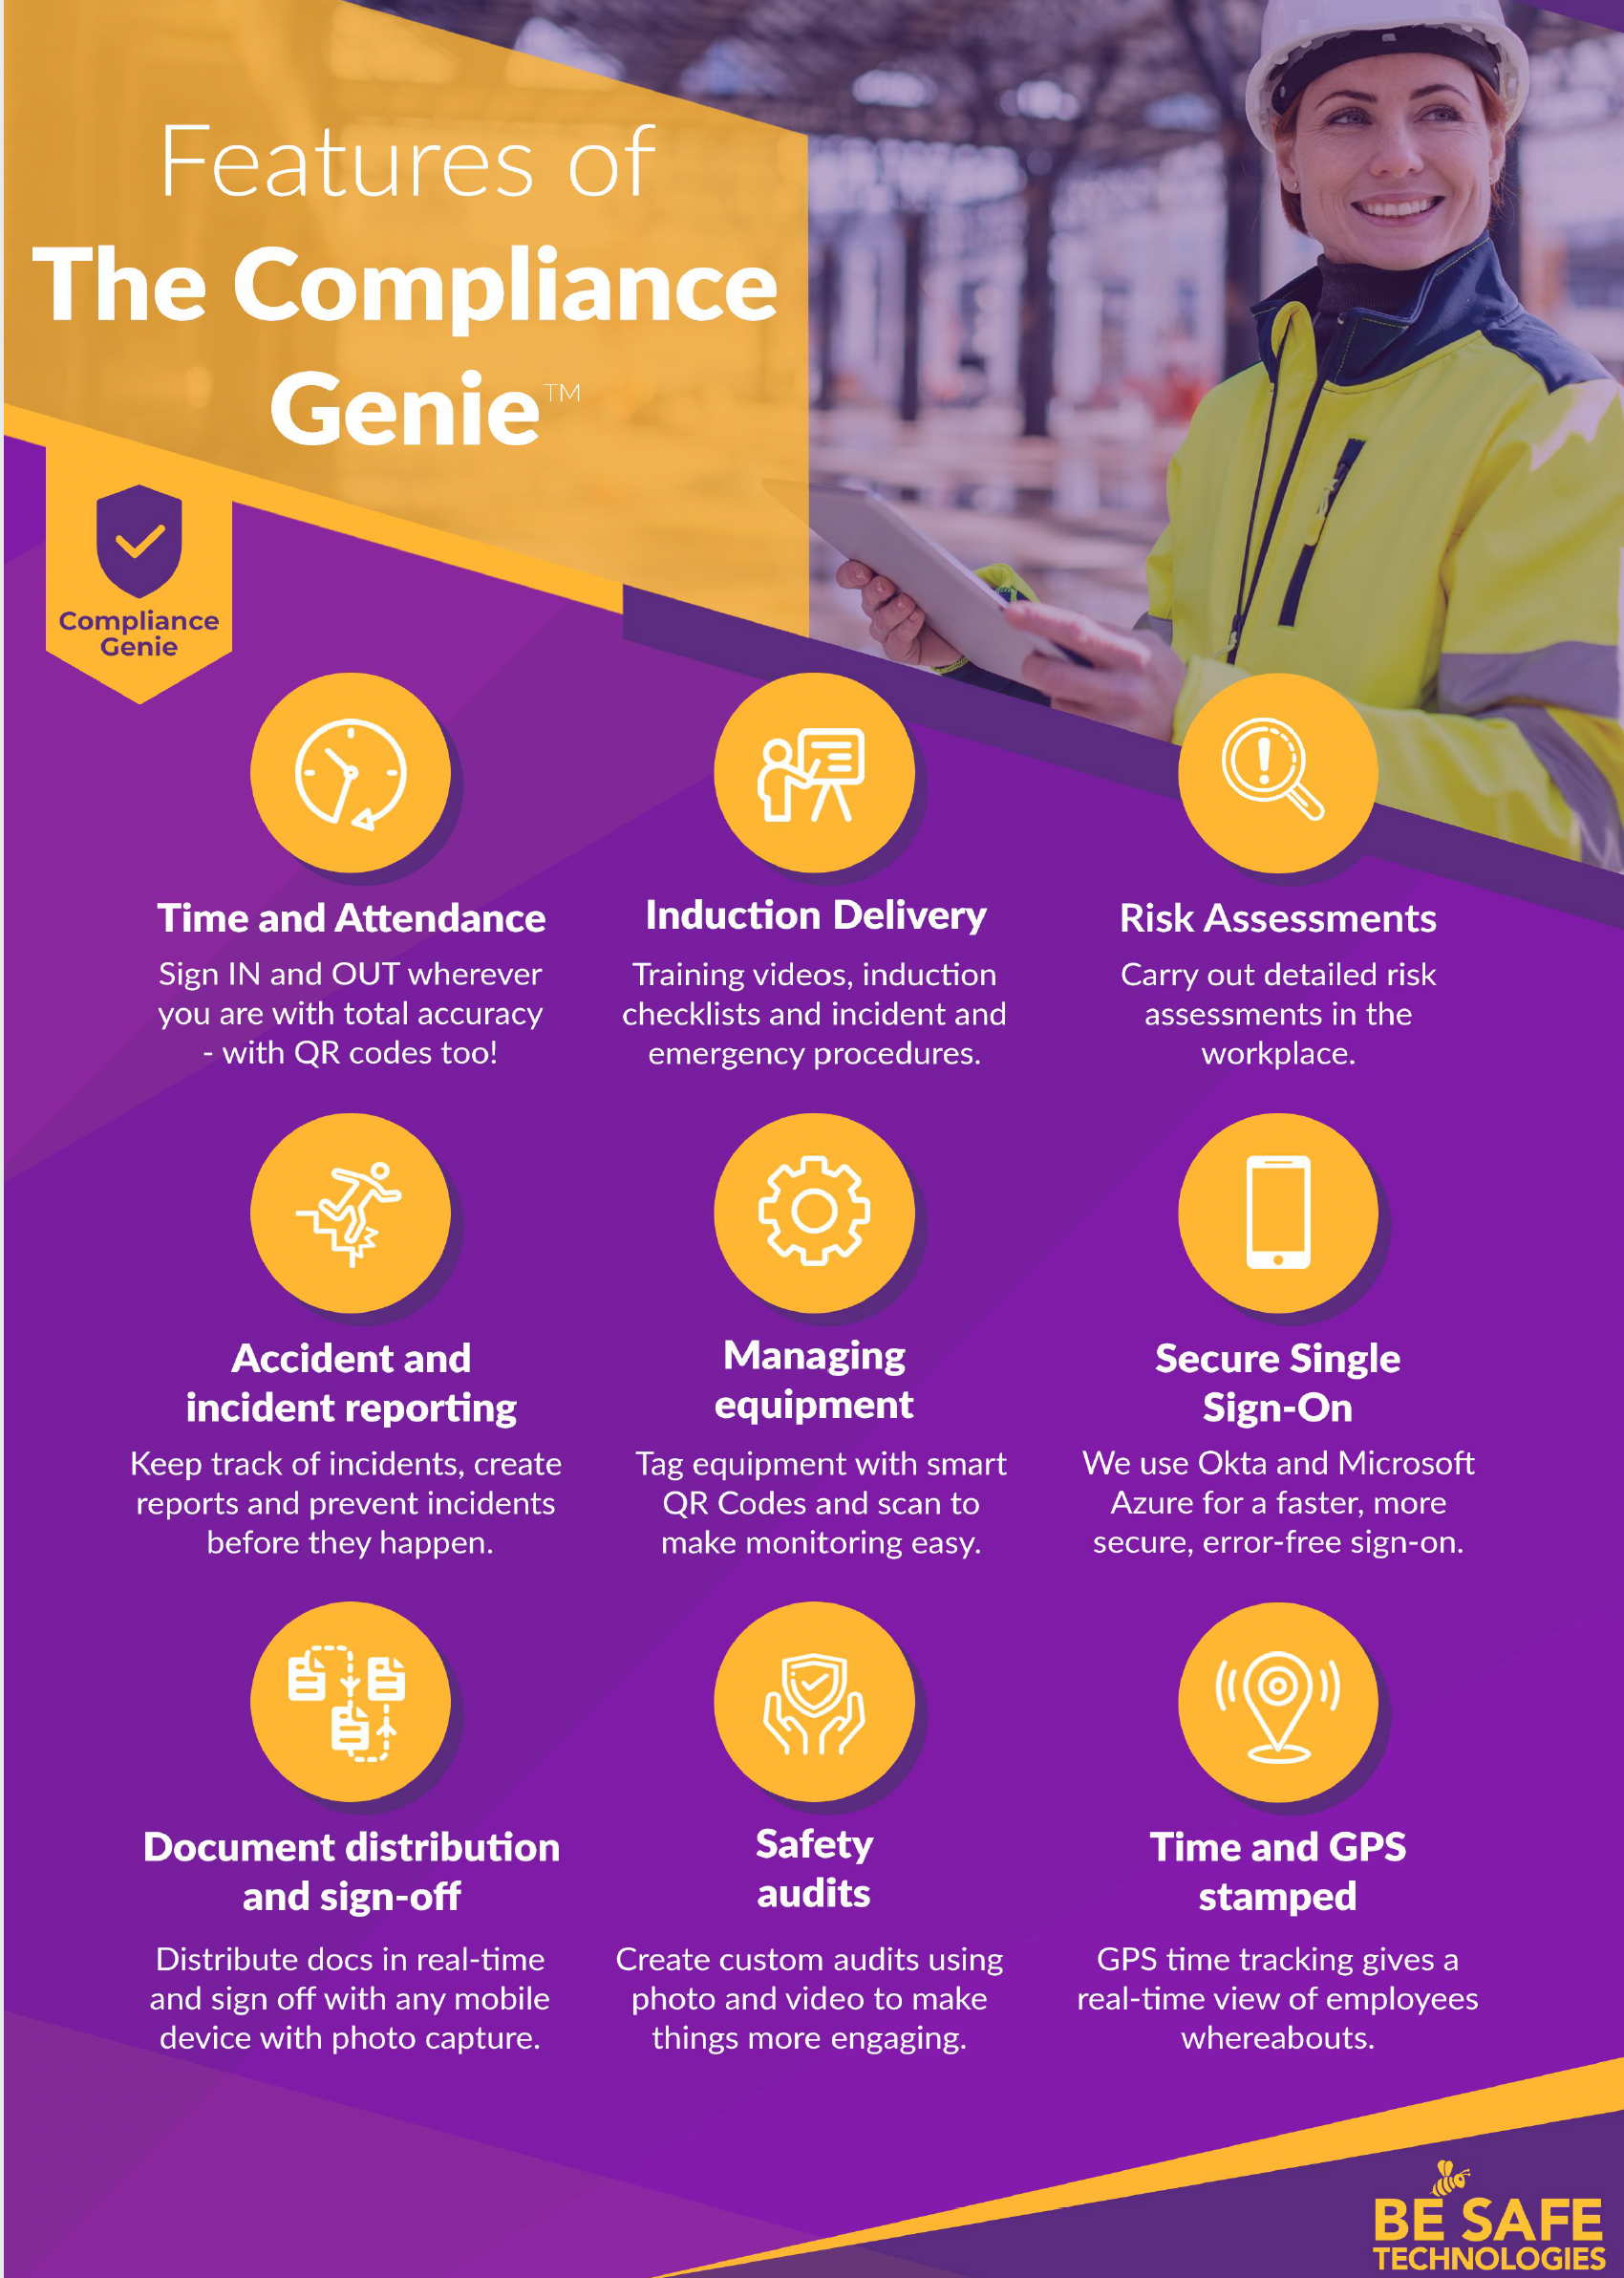 Be-Safe and the Compliance Genie